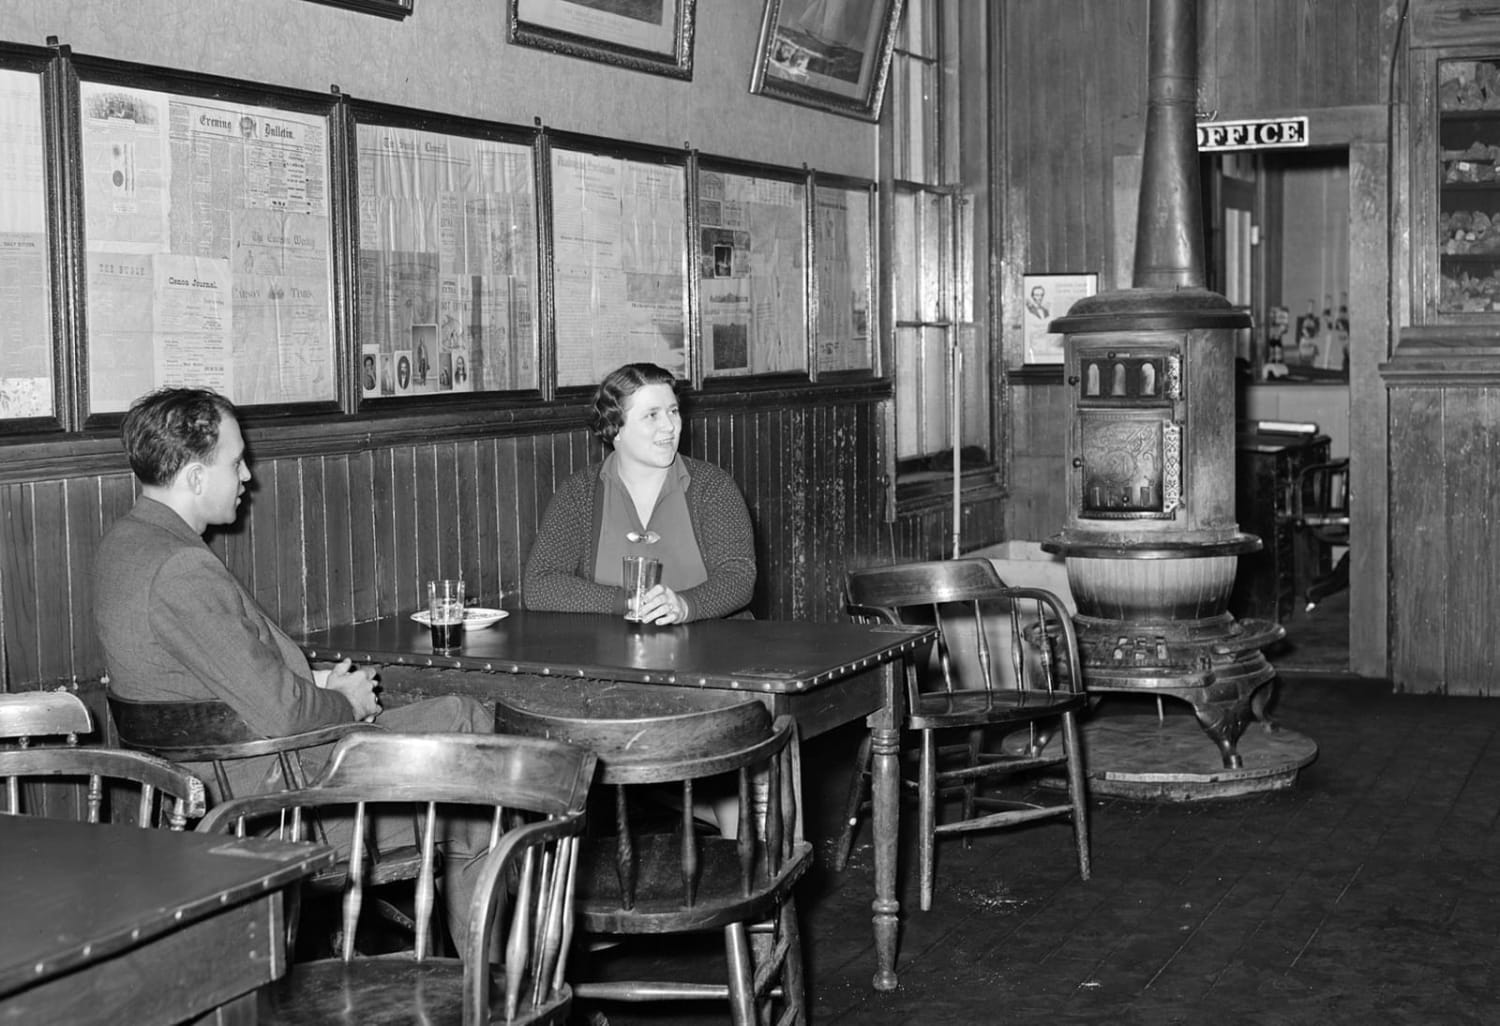 A couple sampling the goods at the Carson Brewery in Carson City, Nevada c.1940